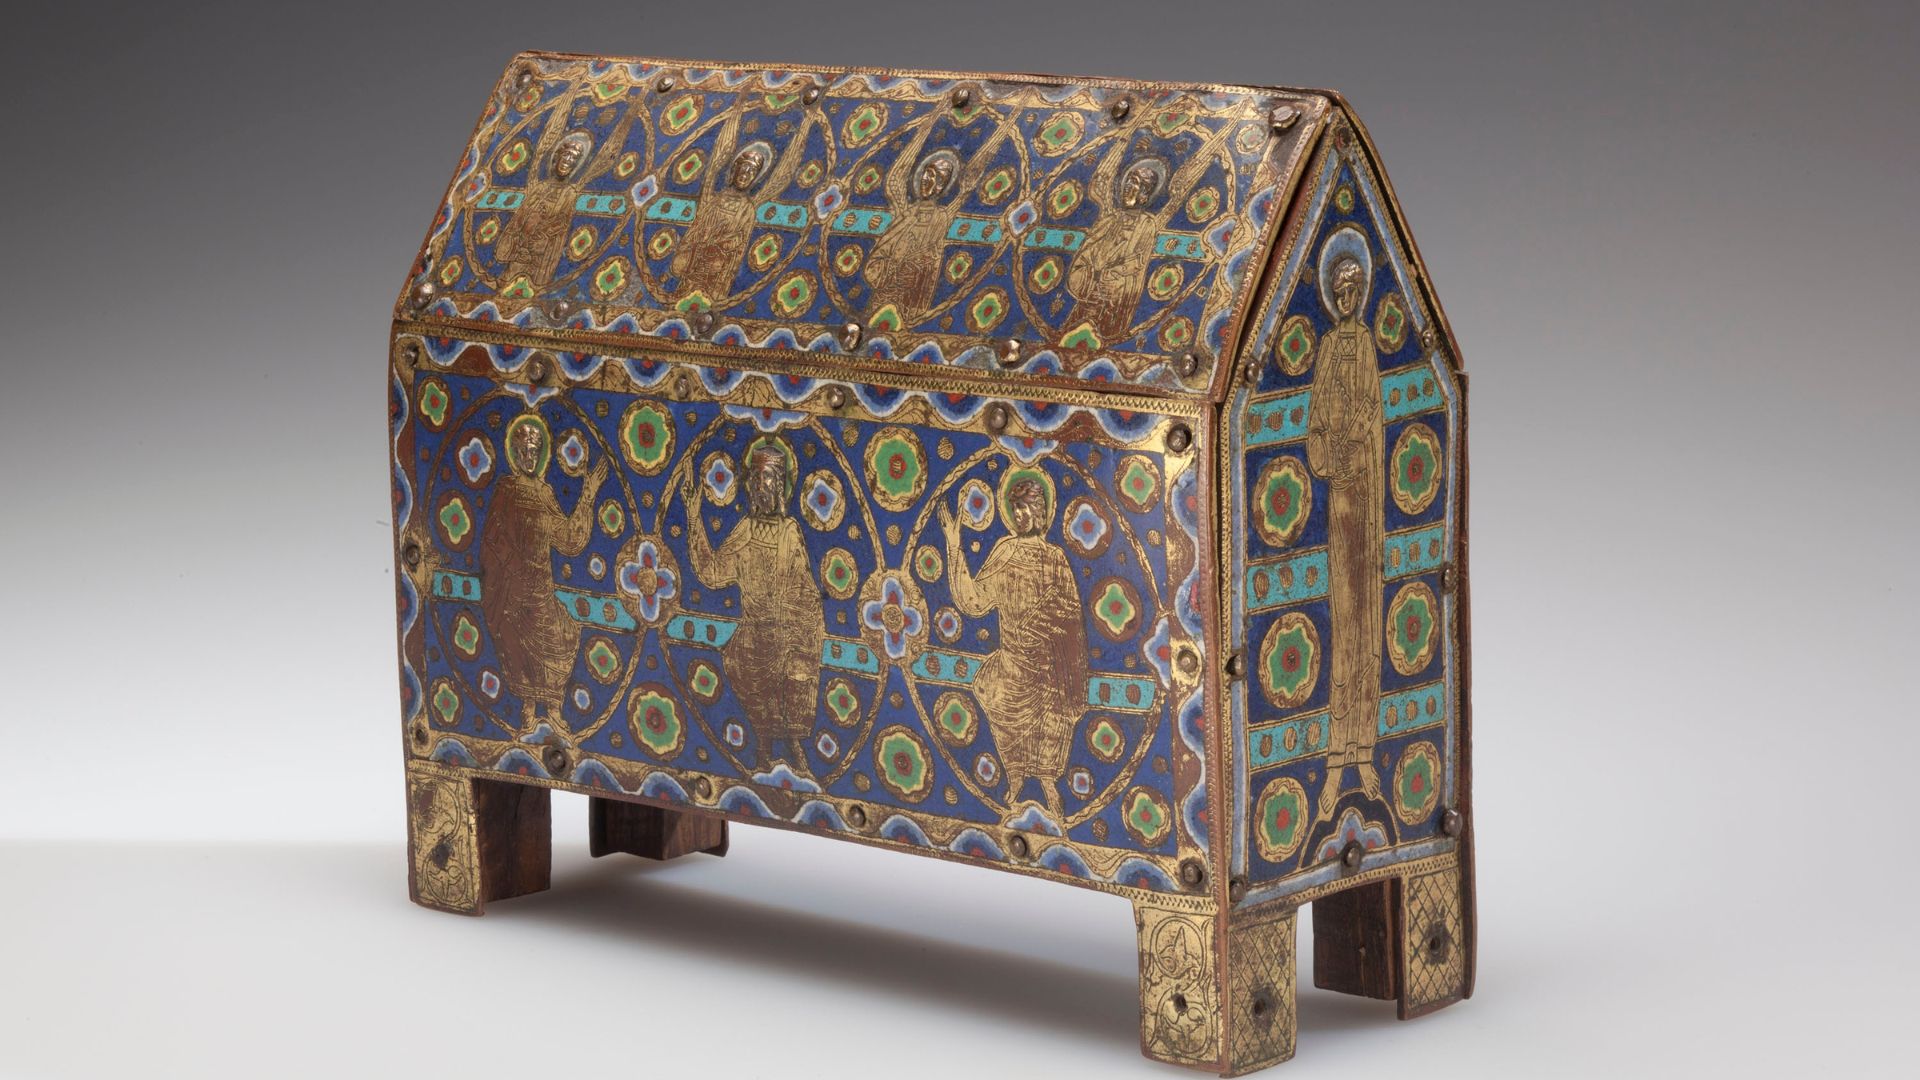 Chasse (Relic Case) is exhibited at the Pulitzer Arts Foundation.